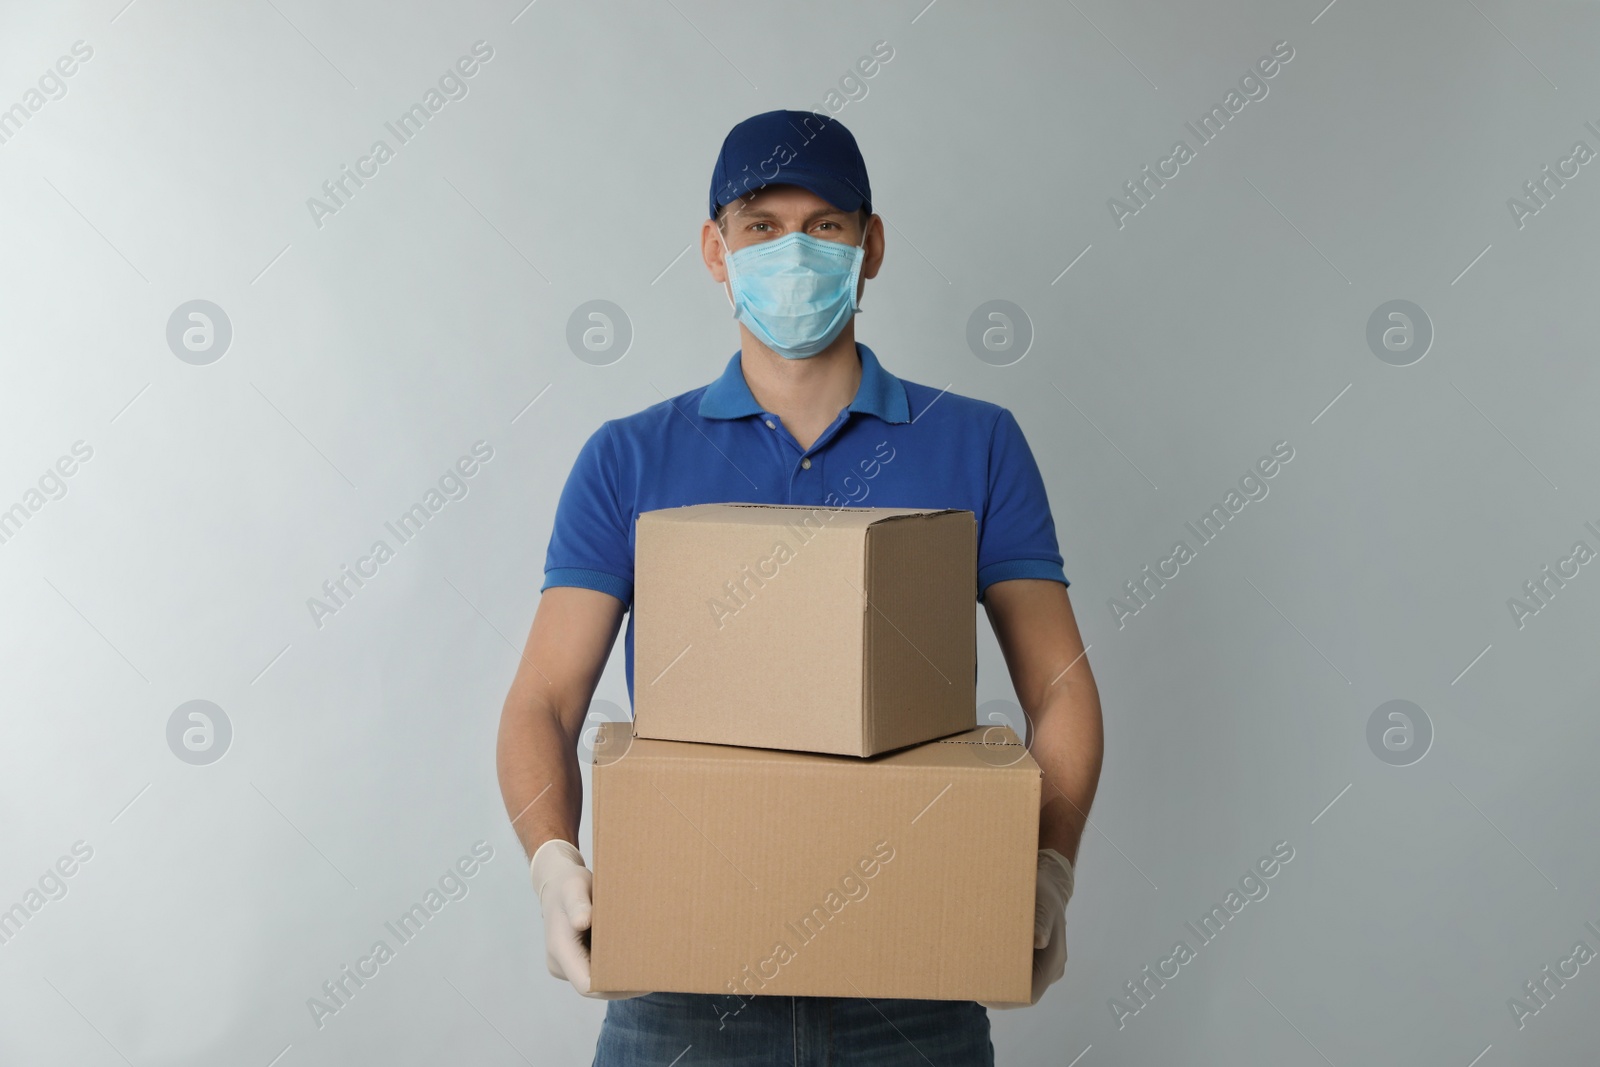 Photo of Courier in protective mask and gloves holding cardboard boxes on light background. Delivery service during coronavirus quarantine